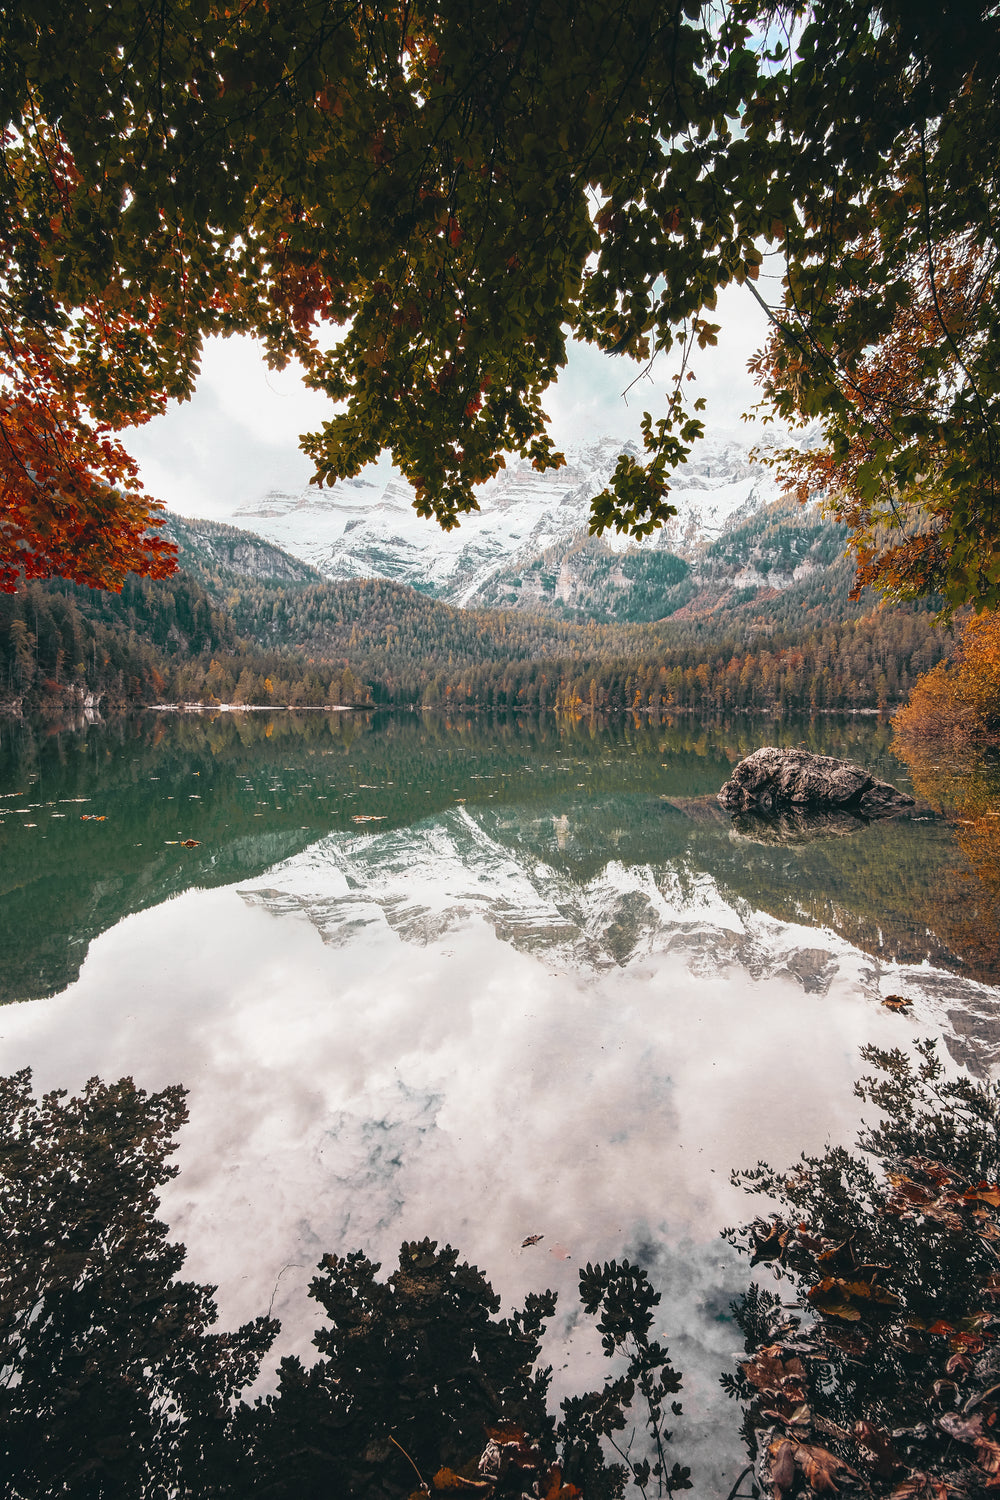 snow covered mountains reflect on the water by a fall forest